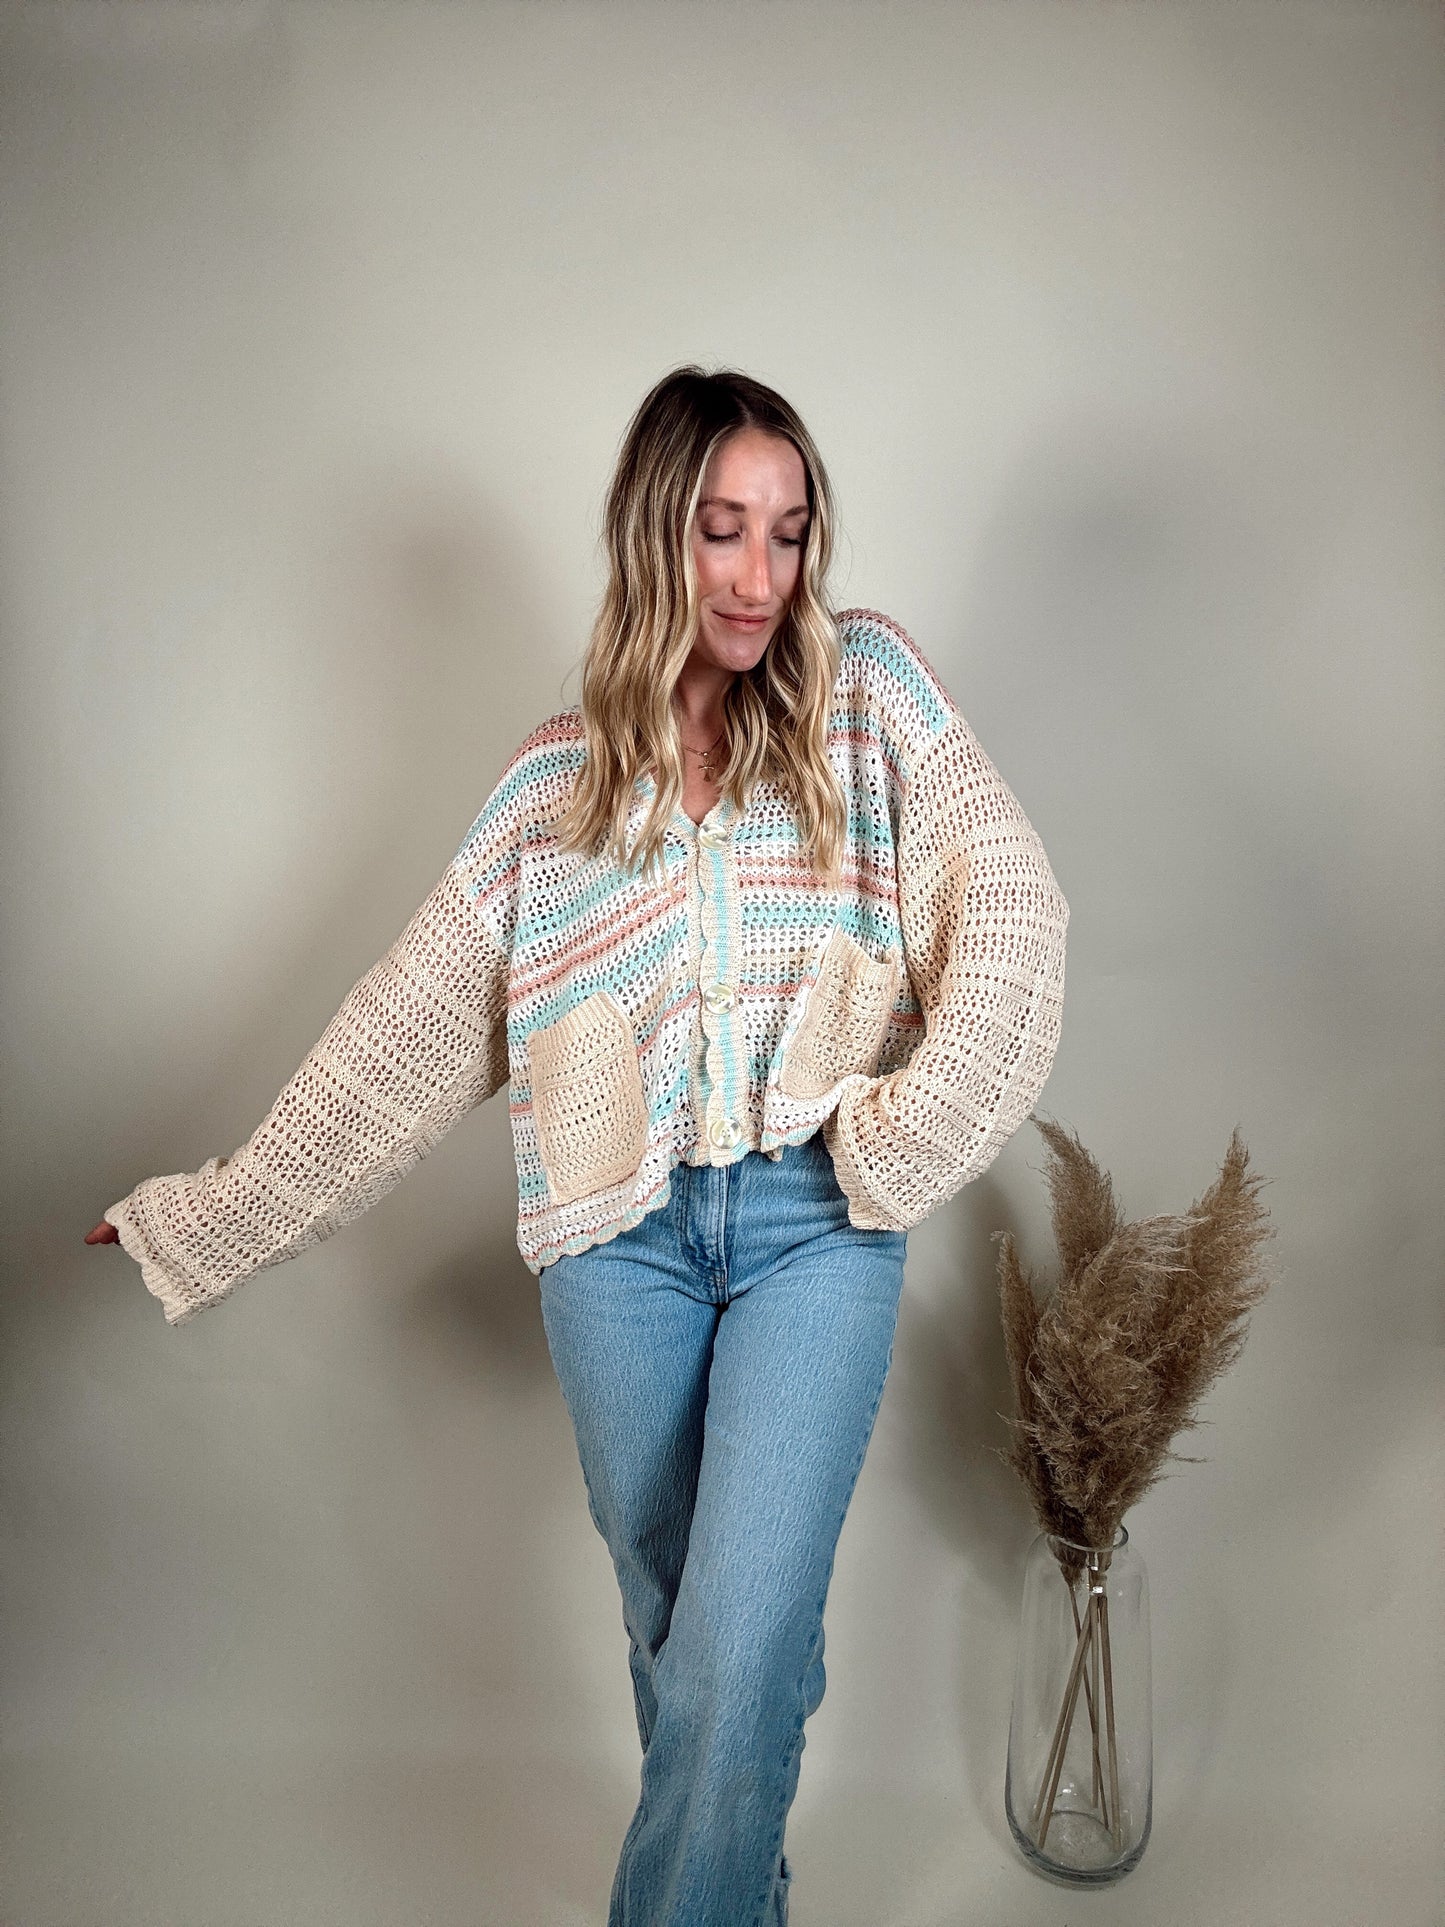 free people dupe, Abercrombie dupe, Zara dupe, amazon, matching set, Pinterest outfit, Pinterest aesthetic, summer outfit, spring outfit, spring trends, trending, poplular boutique, boho outfit, boho clothing, boho cardigan